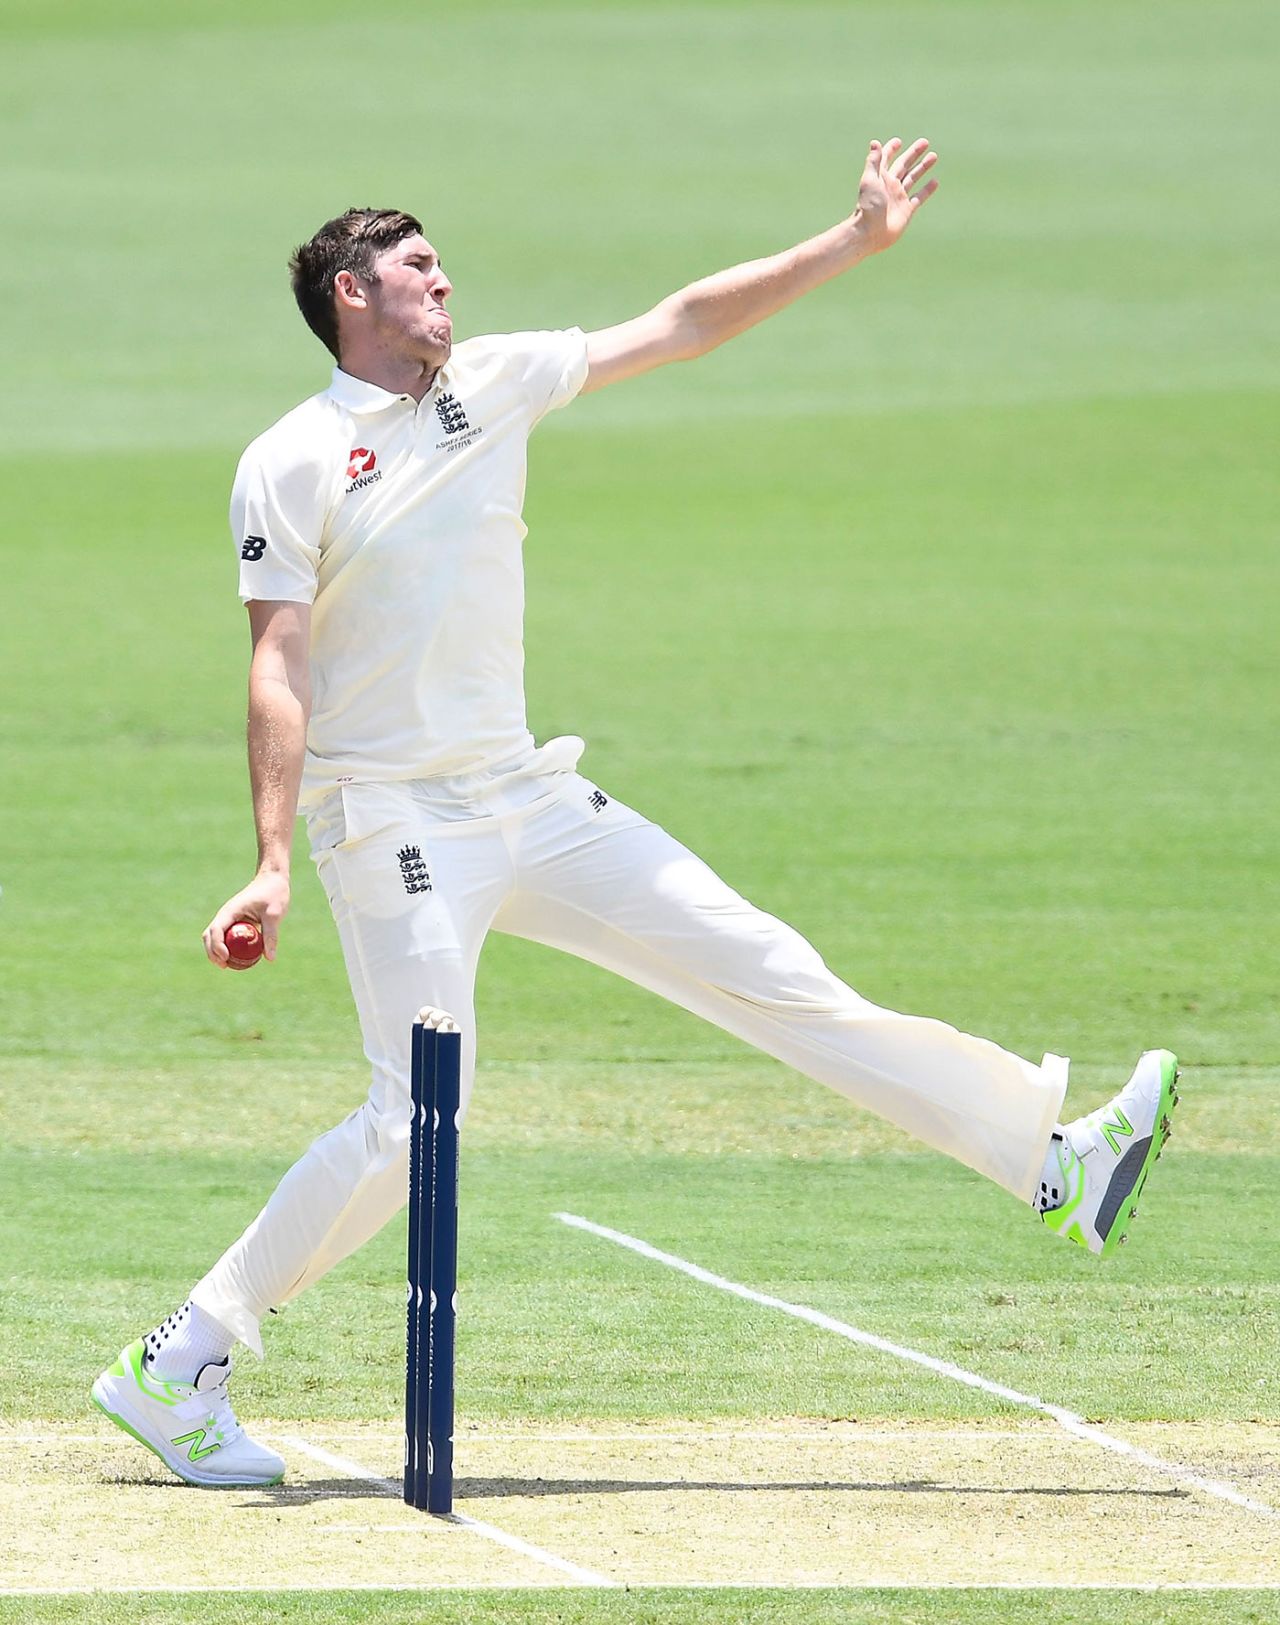 Craig Overton collected two wickets, Cricket Australia XI v England, The Ashes 2017-18, tour match, 1st day, Townsville, November 15, 2017